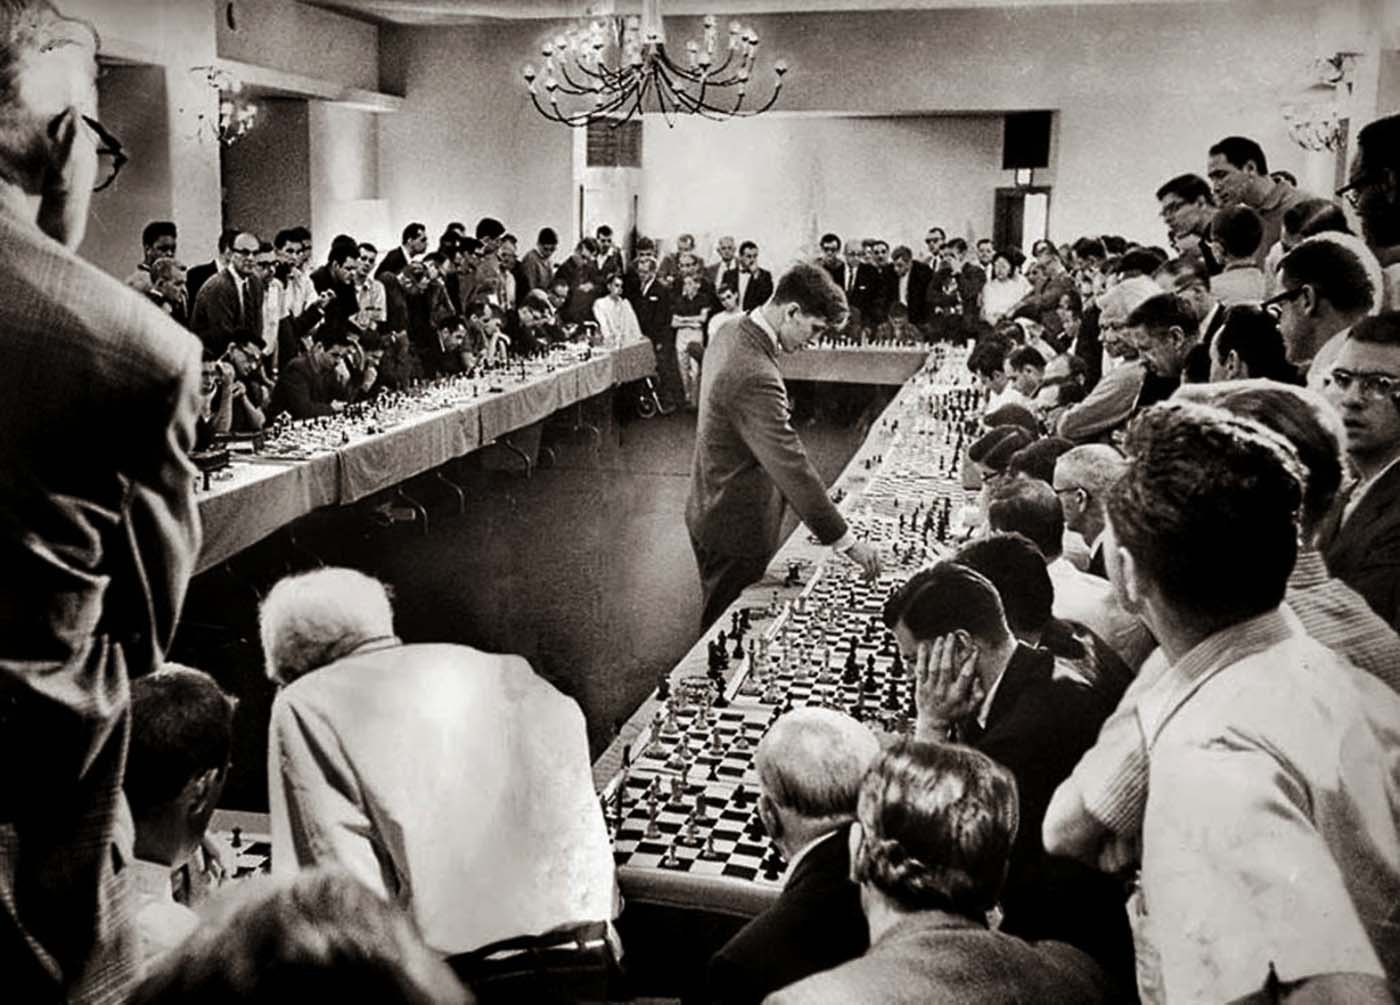 Prueter - Simultaneous - Blindfolded Chess Exhibition